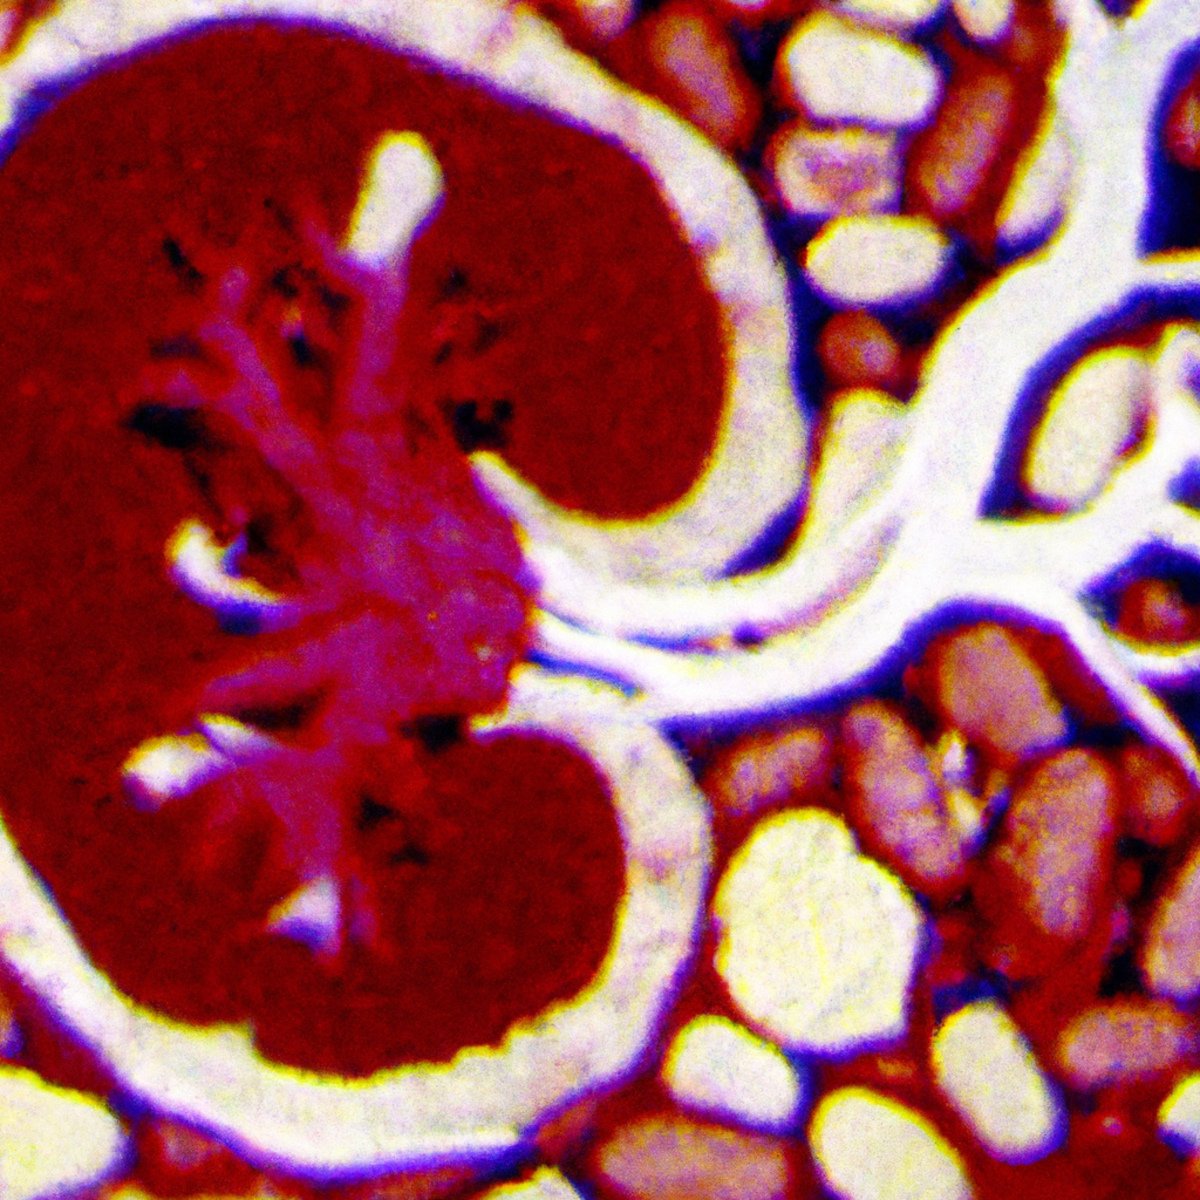 Close-up of medullary sponge kidney, showcasing unique texture, patterns, and contours caused by rare disorder.